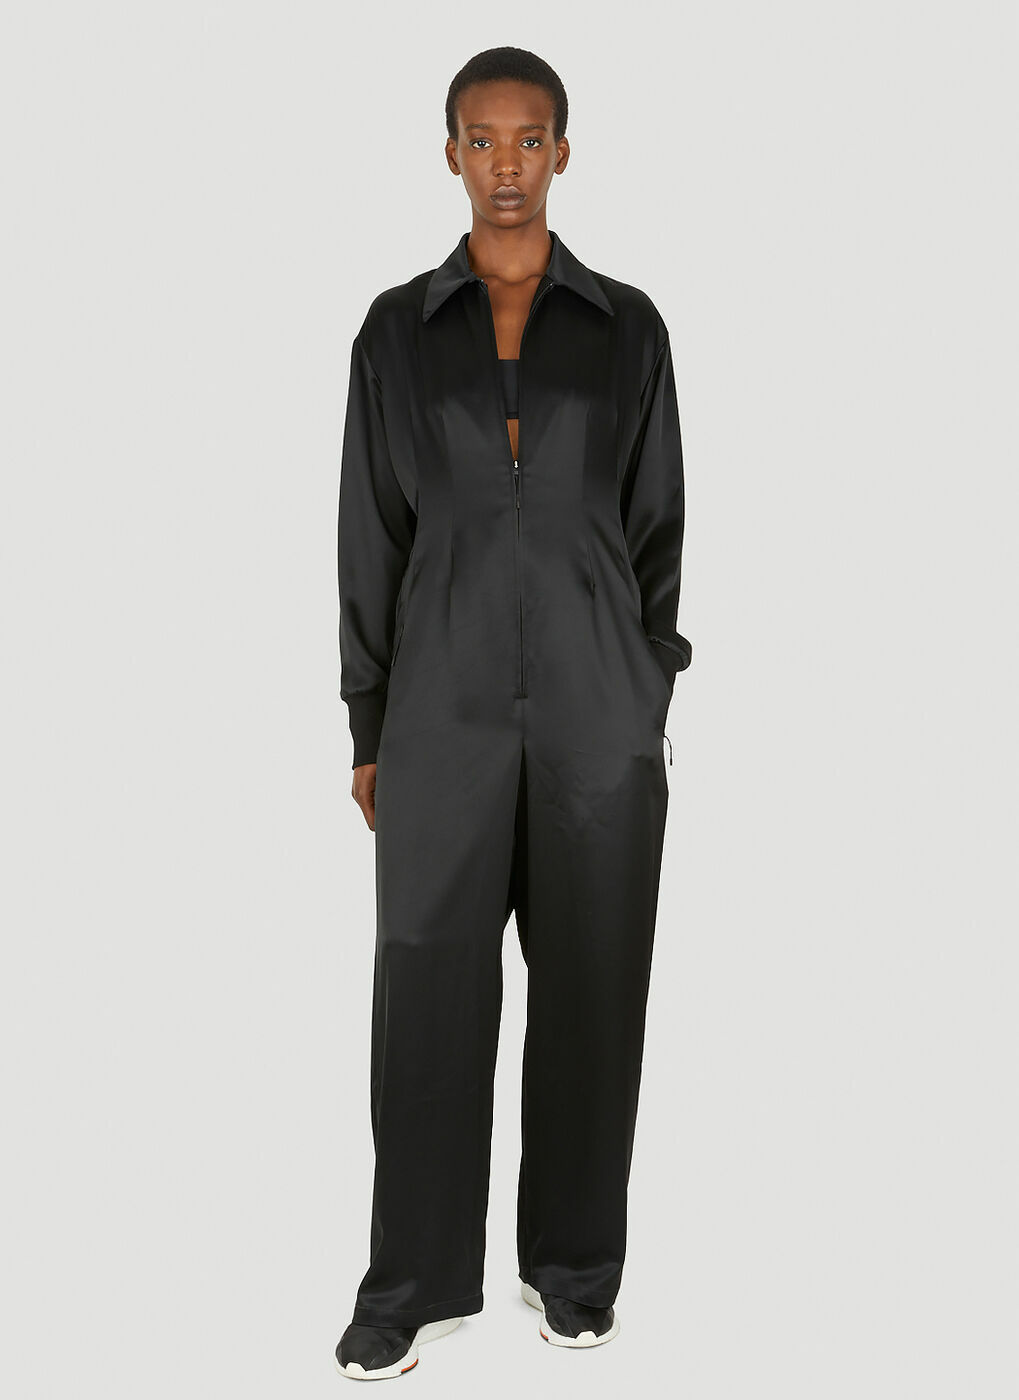 Technical Jumpsuit in Black Y-3